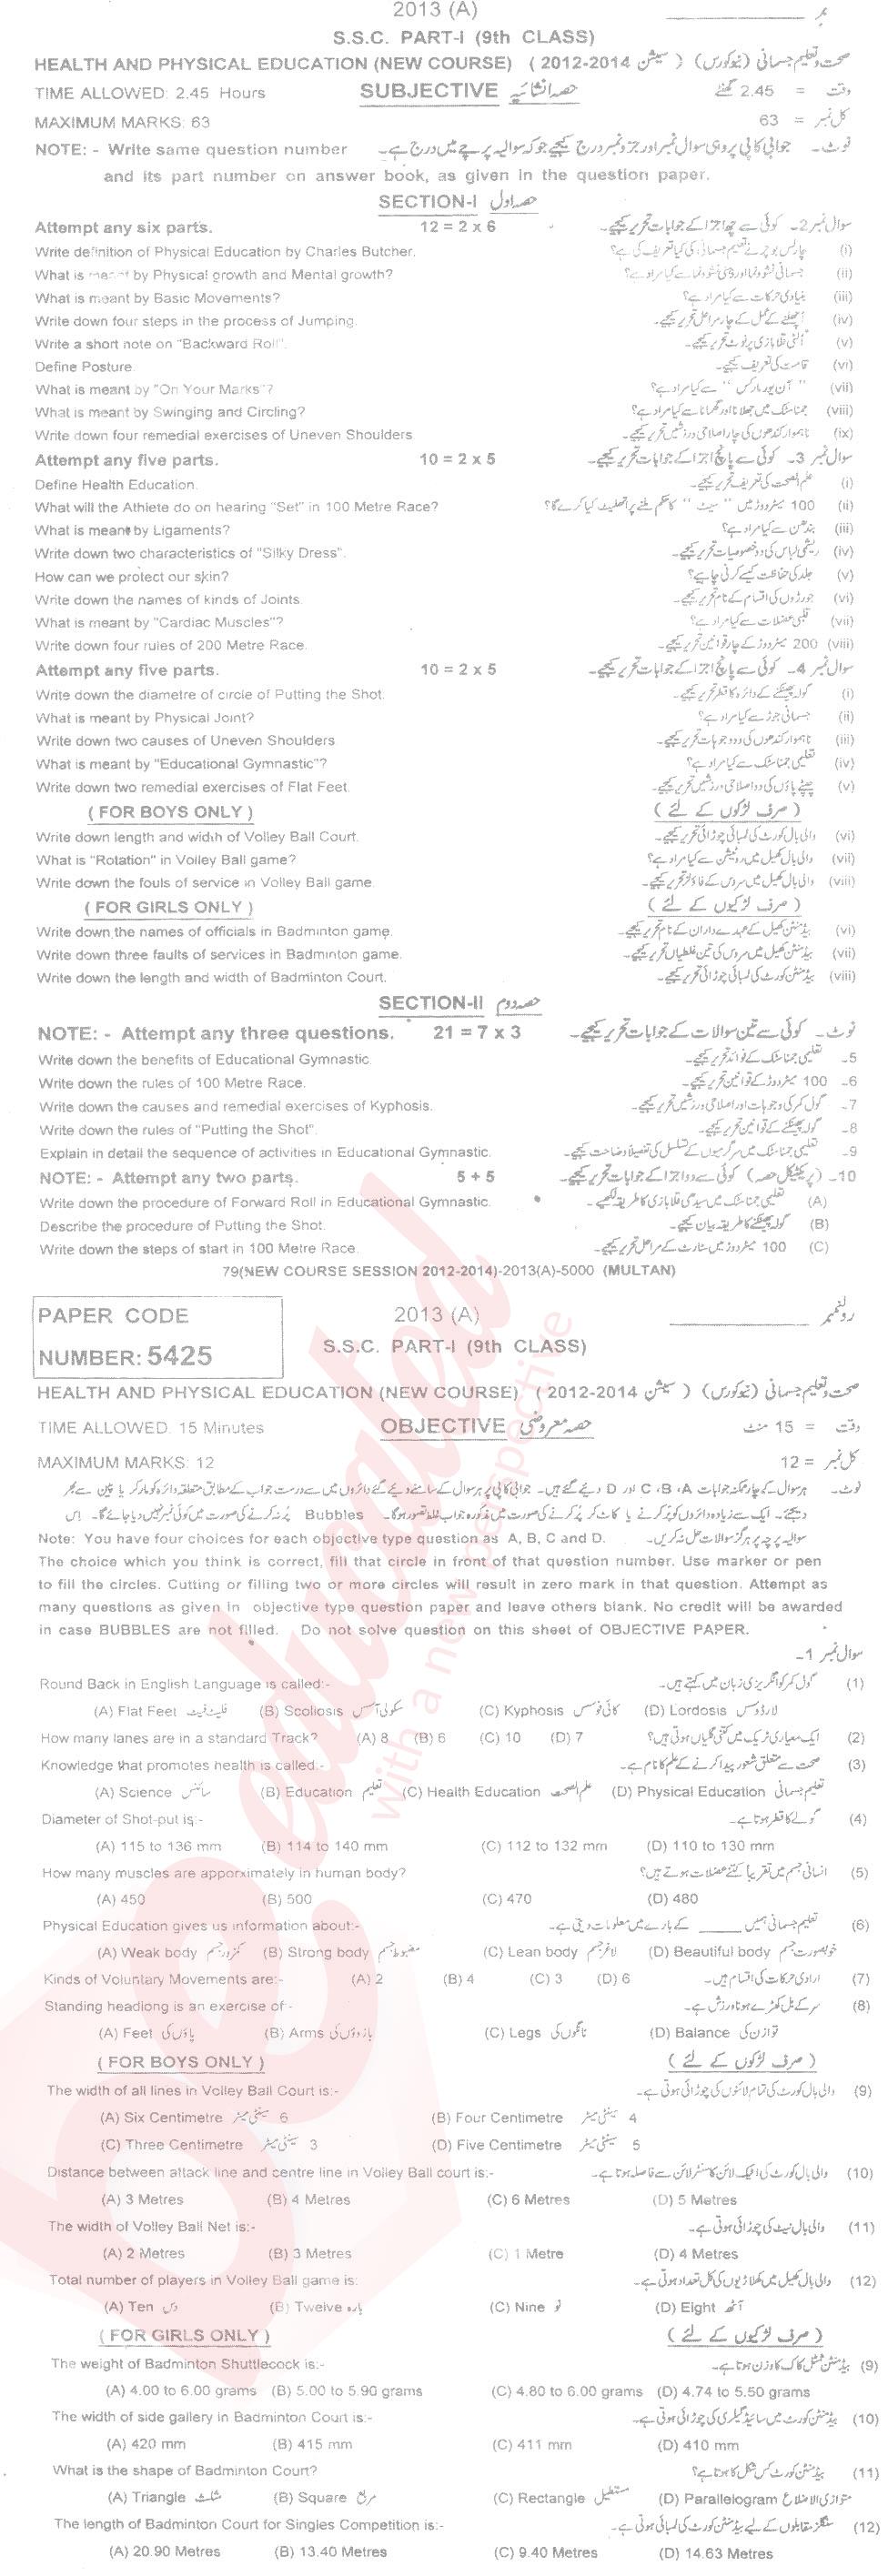 Health and Physical Education 9th English Medium Past Paper Group 1 BISE Multan 2013